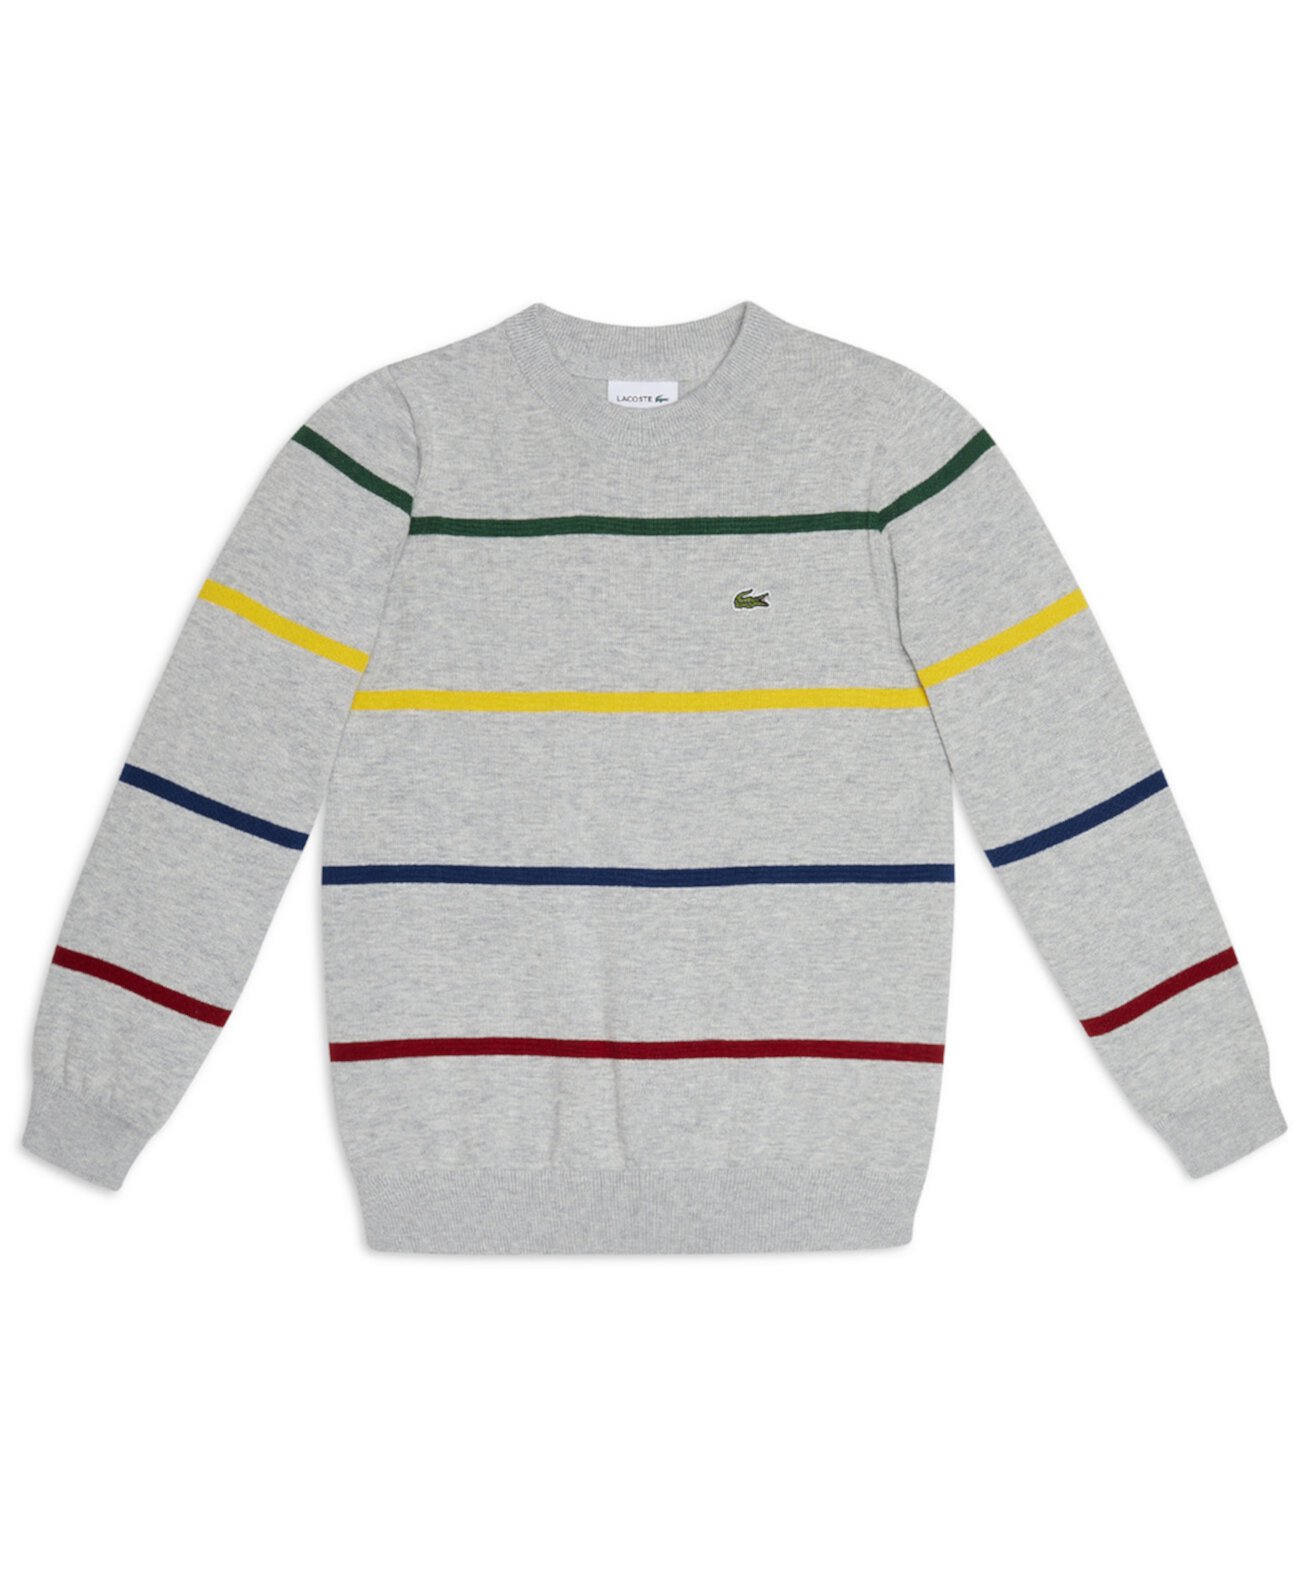 Toddler Boys Long Sleeve Cotton-Blend Striped Sweater Lacoste